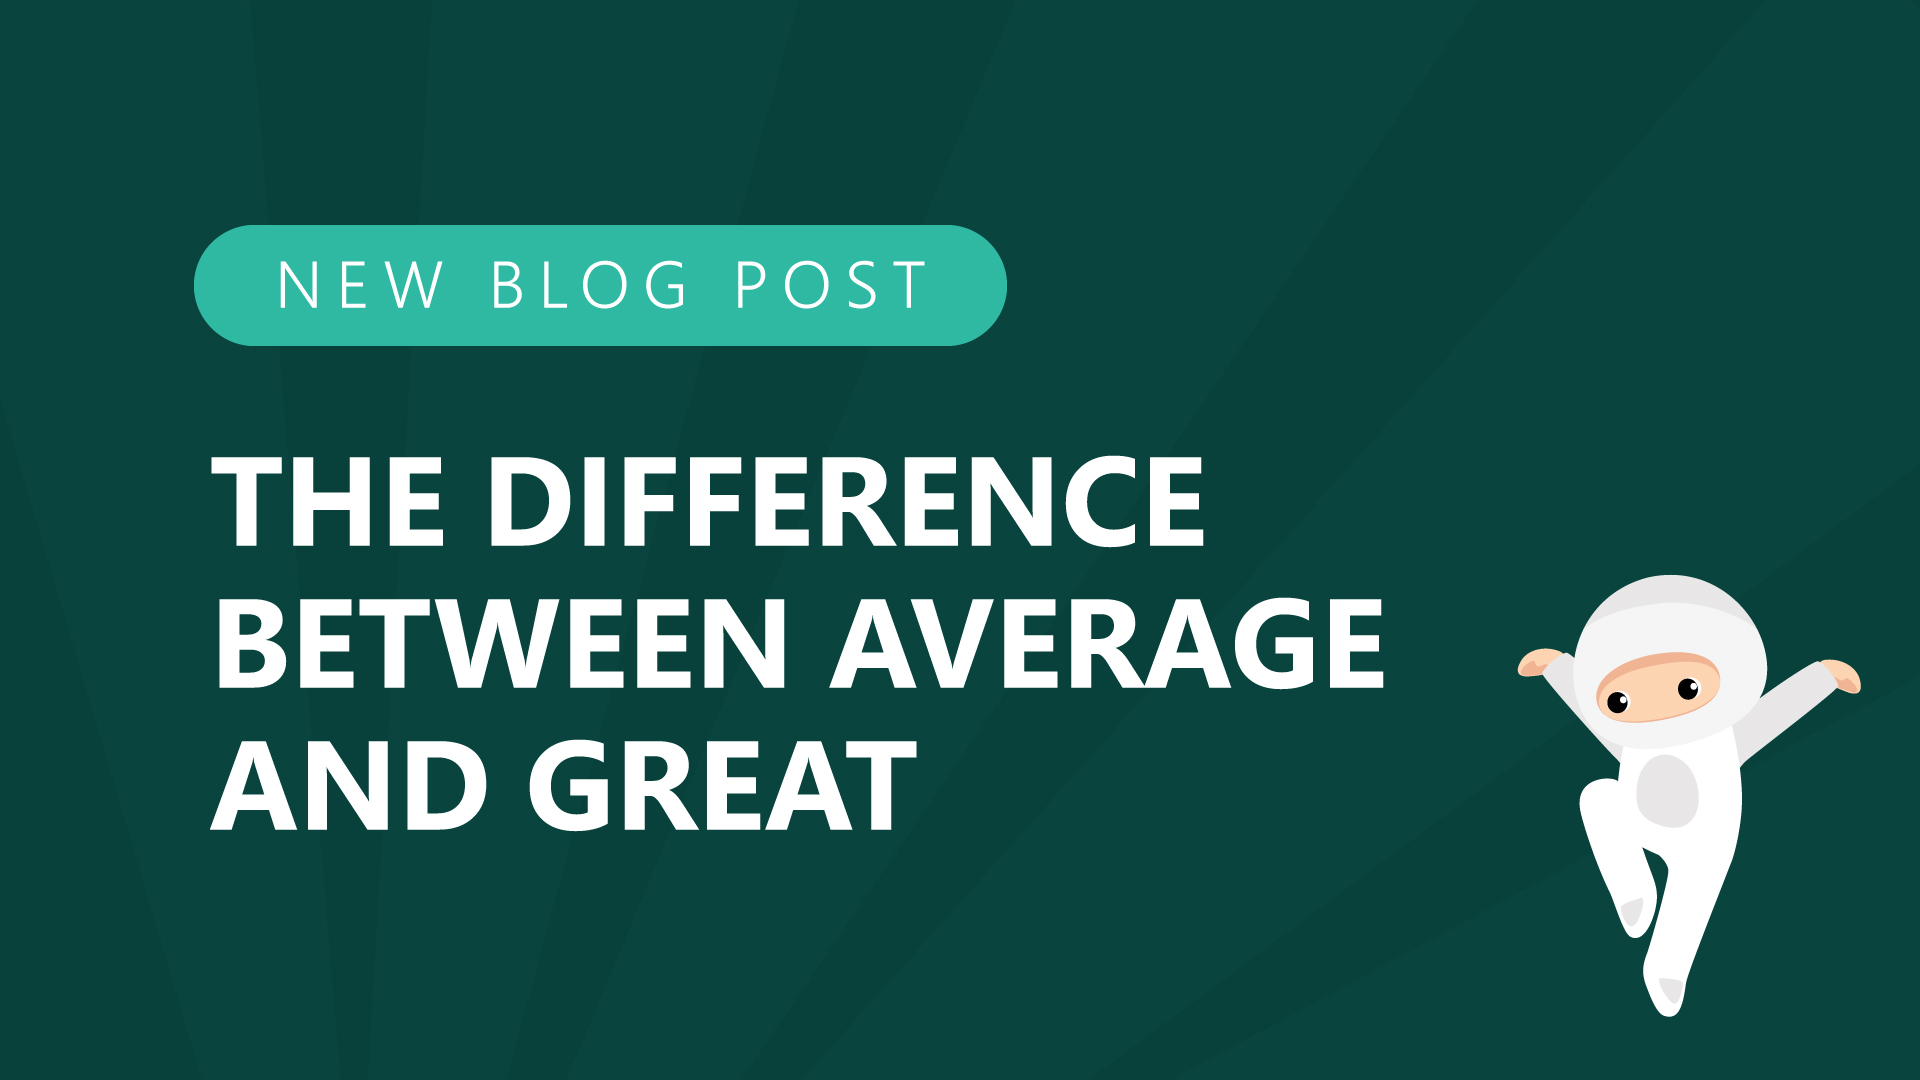 10-The-Difference-Between-Average-and-Great-Salespeople.jpg